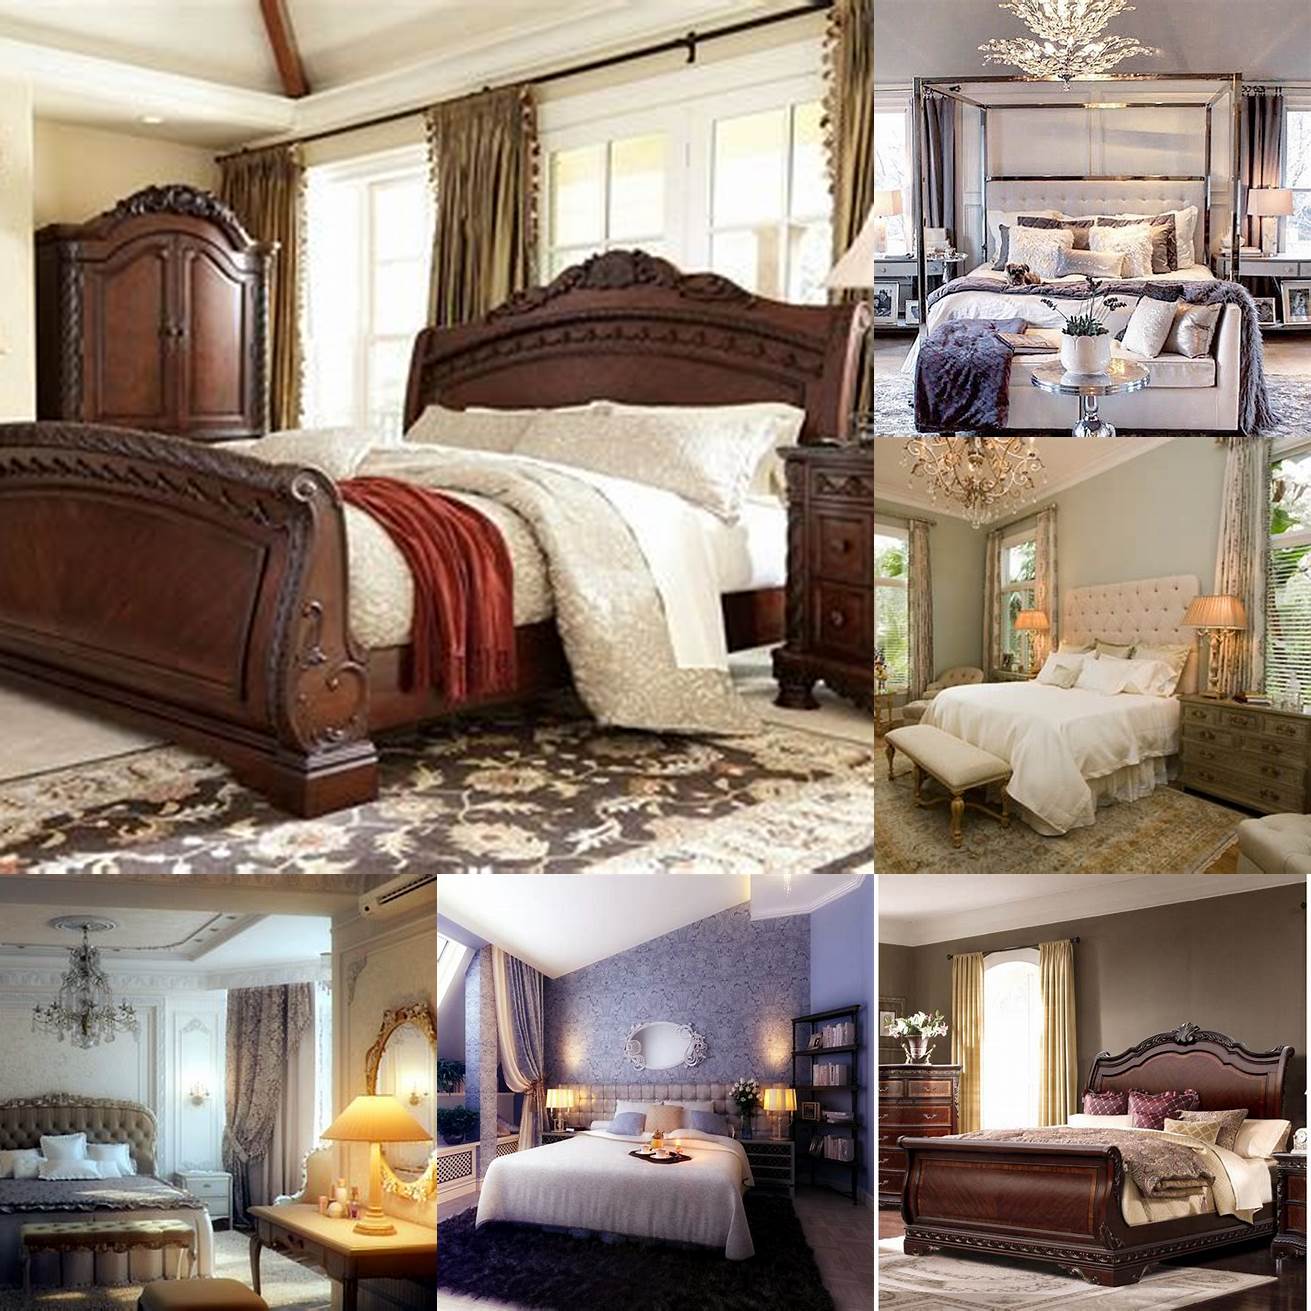 A traditional bedroom exudes sophistication and elegance The intricate details of the furniture and the rich colors of the fabrics create a luxurious ambiance that is perfect for those who appreciate classic beauty